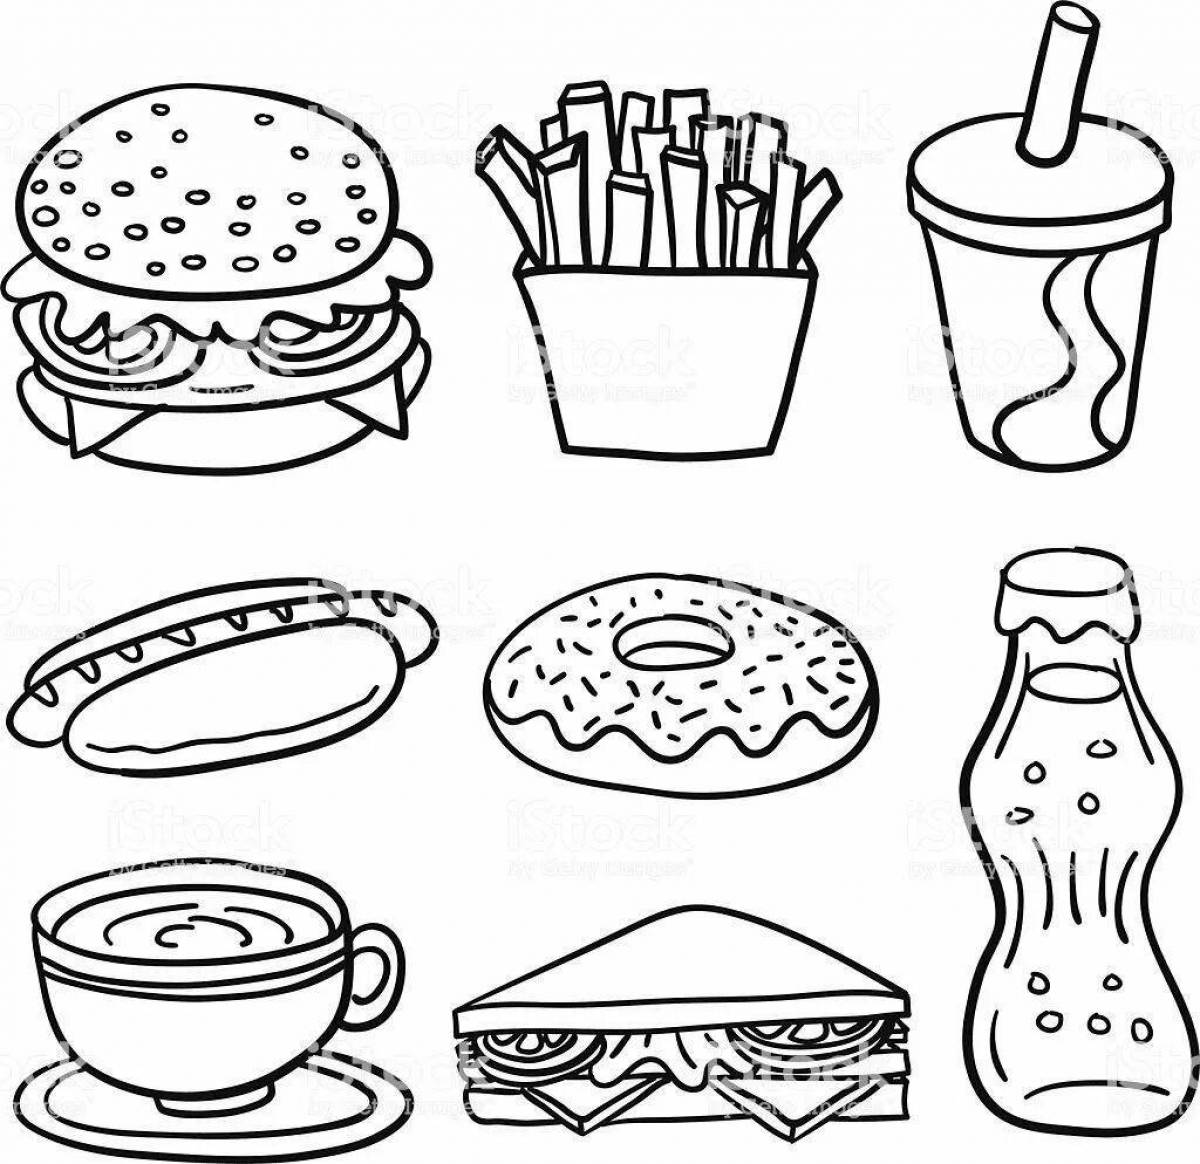 Fun foodstuffs coloring page for 6-7 year olds